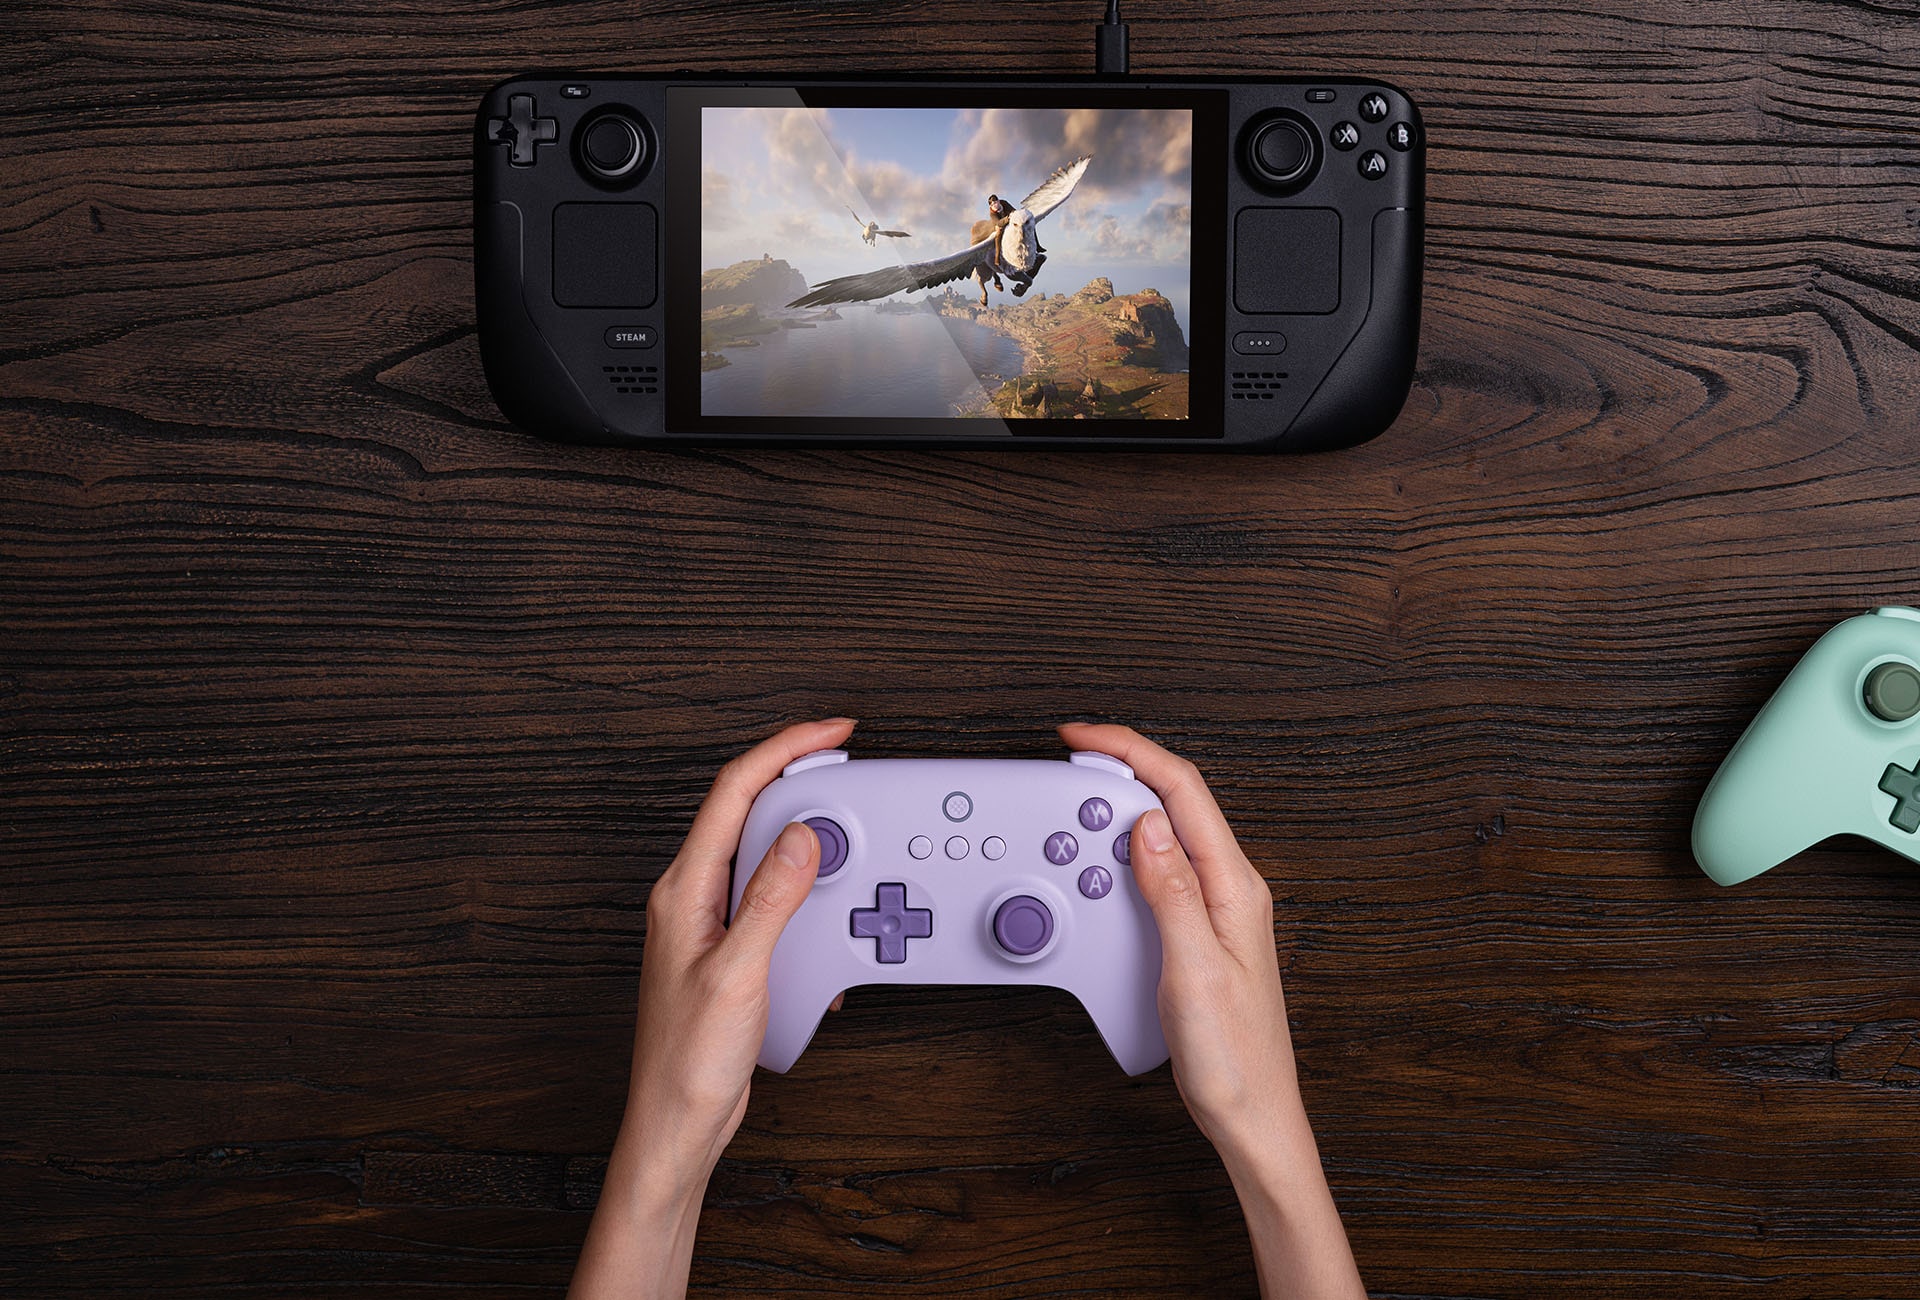 Ultimate C 2.4G Wireless Controller